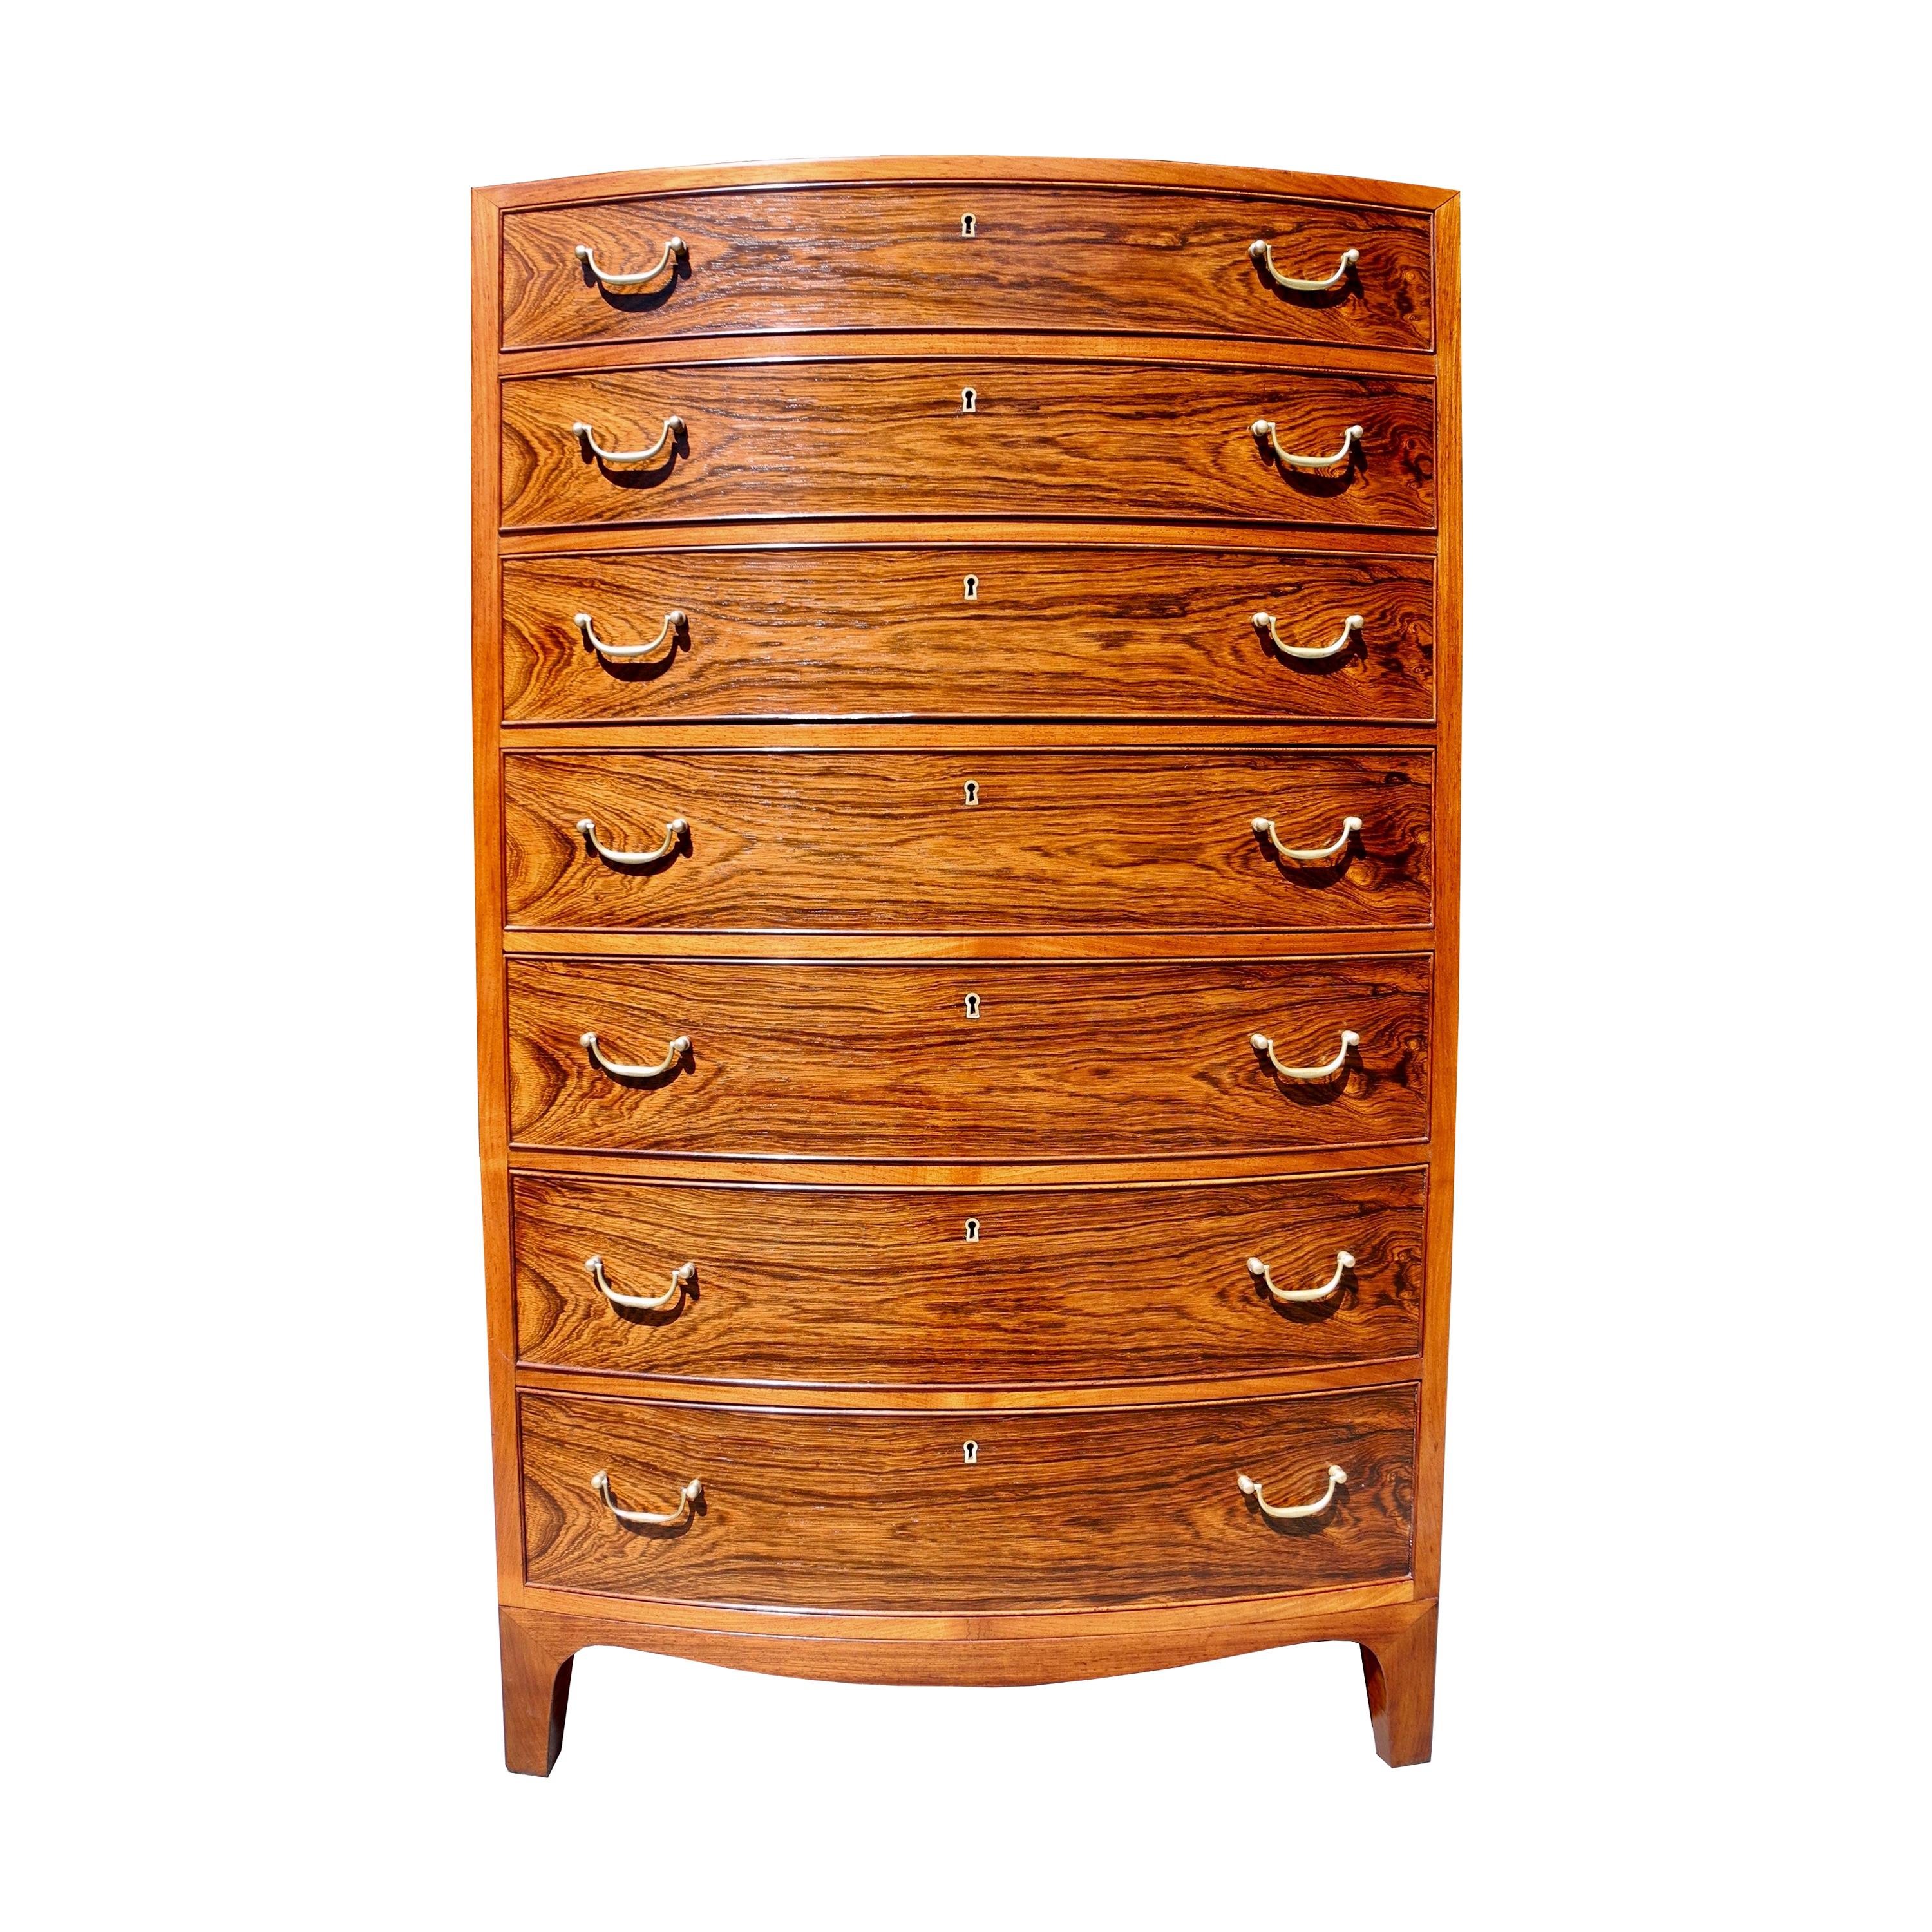 Danish Modern Tall Rosewood Bombe Dresser or Chest of Drawers by Ole Wanscher For Sale